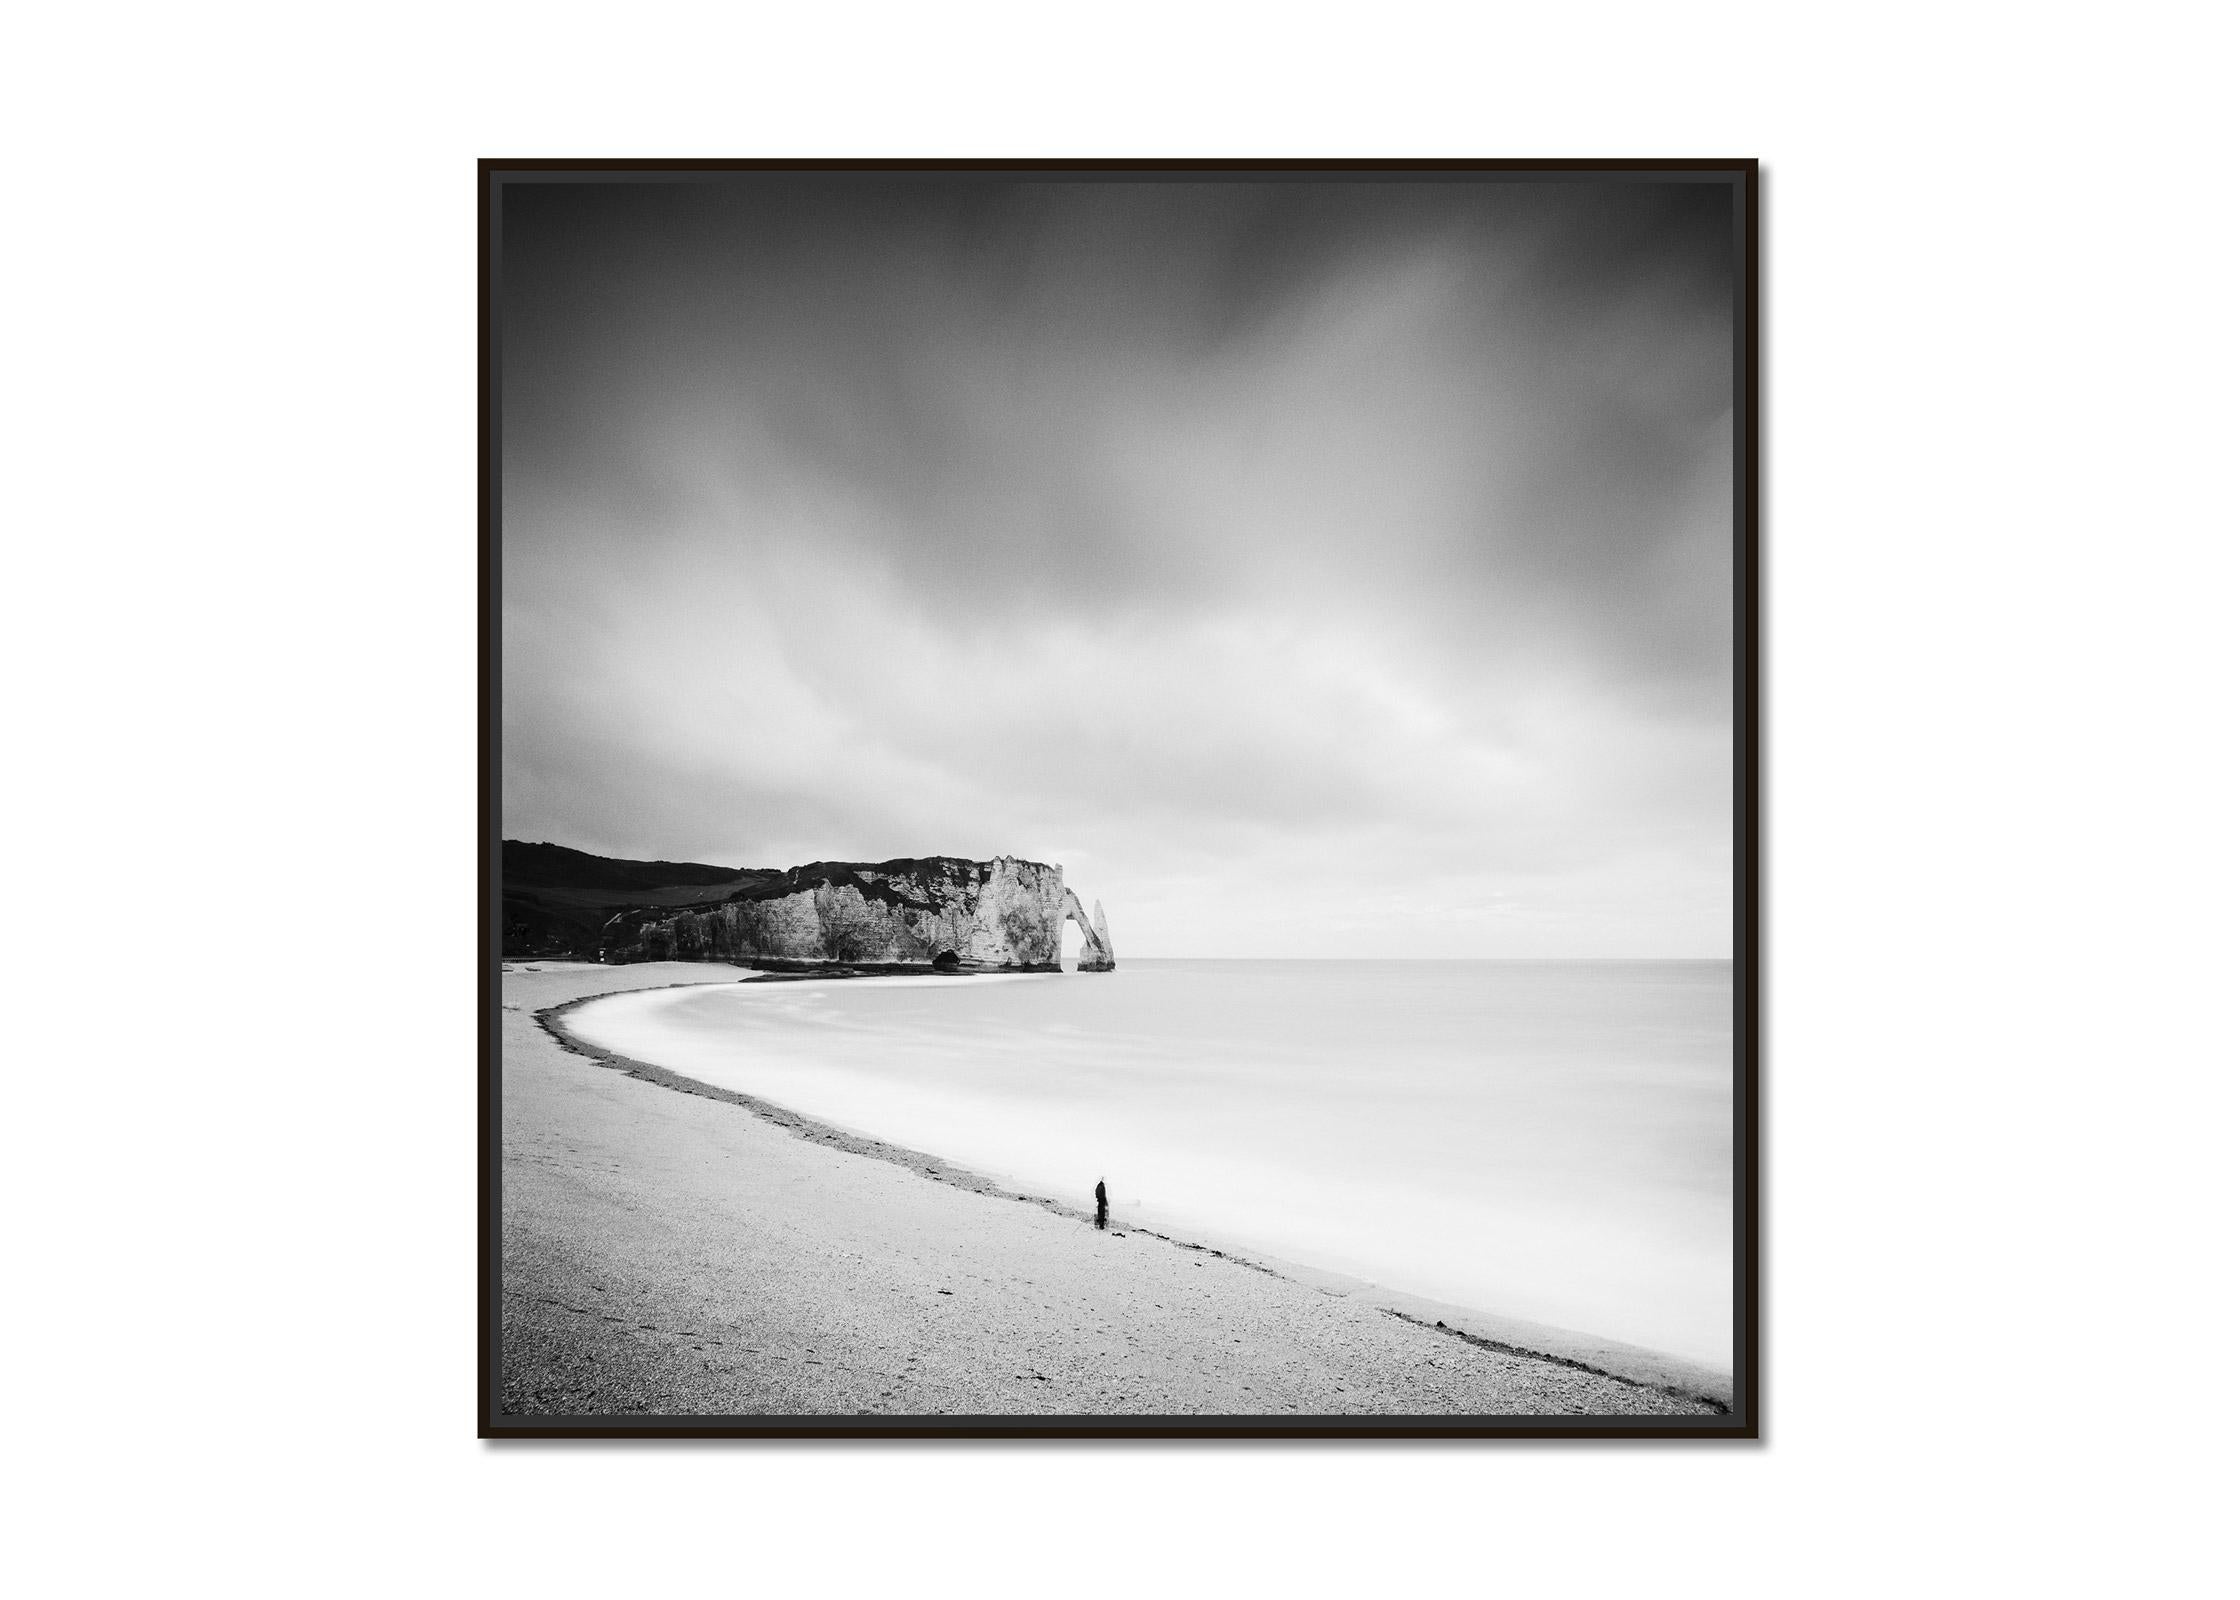 Fishermans Dream coast France black white long exposure landscape photography - Photograph by Gerald Berghammer, Ina Forstinger